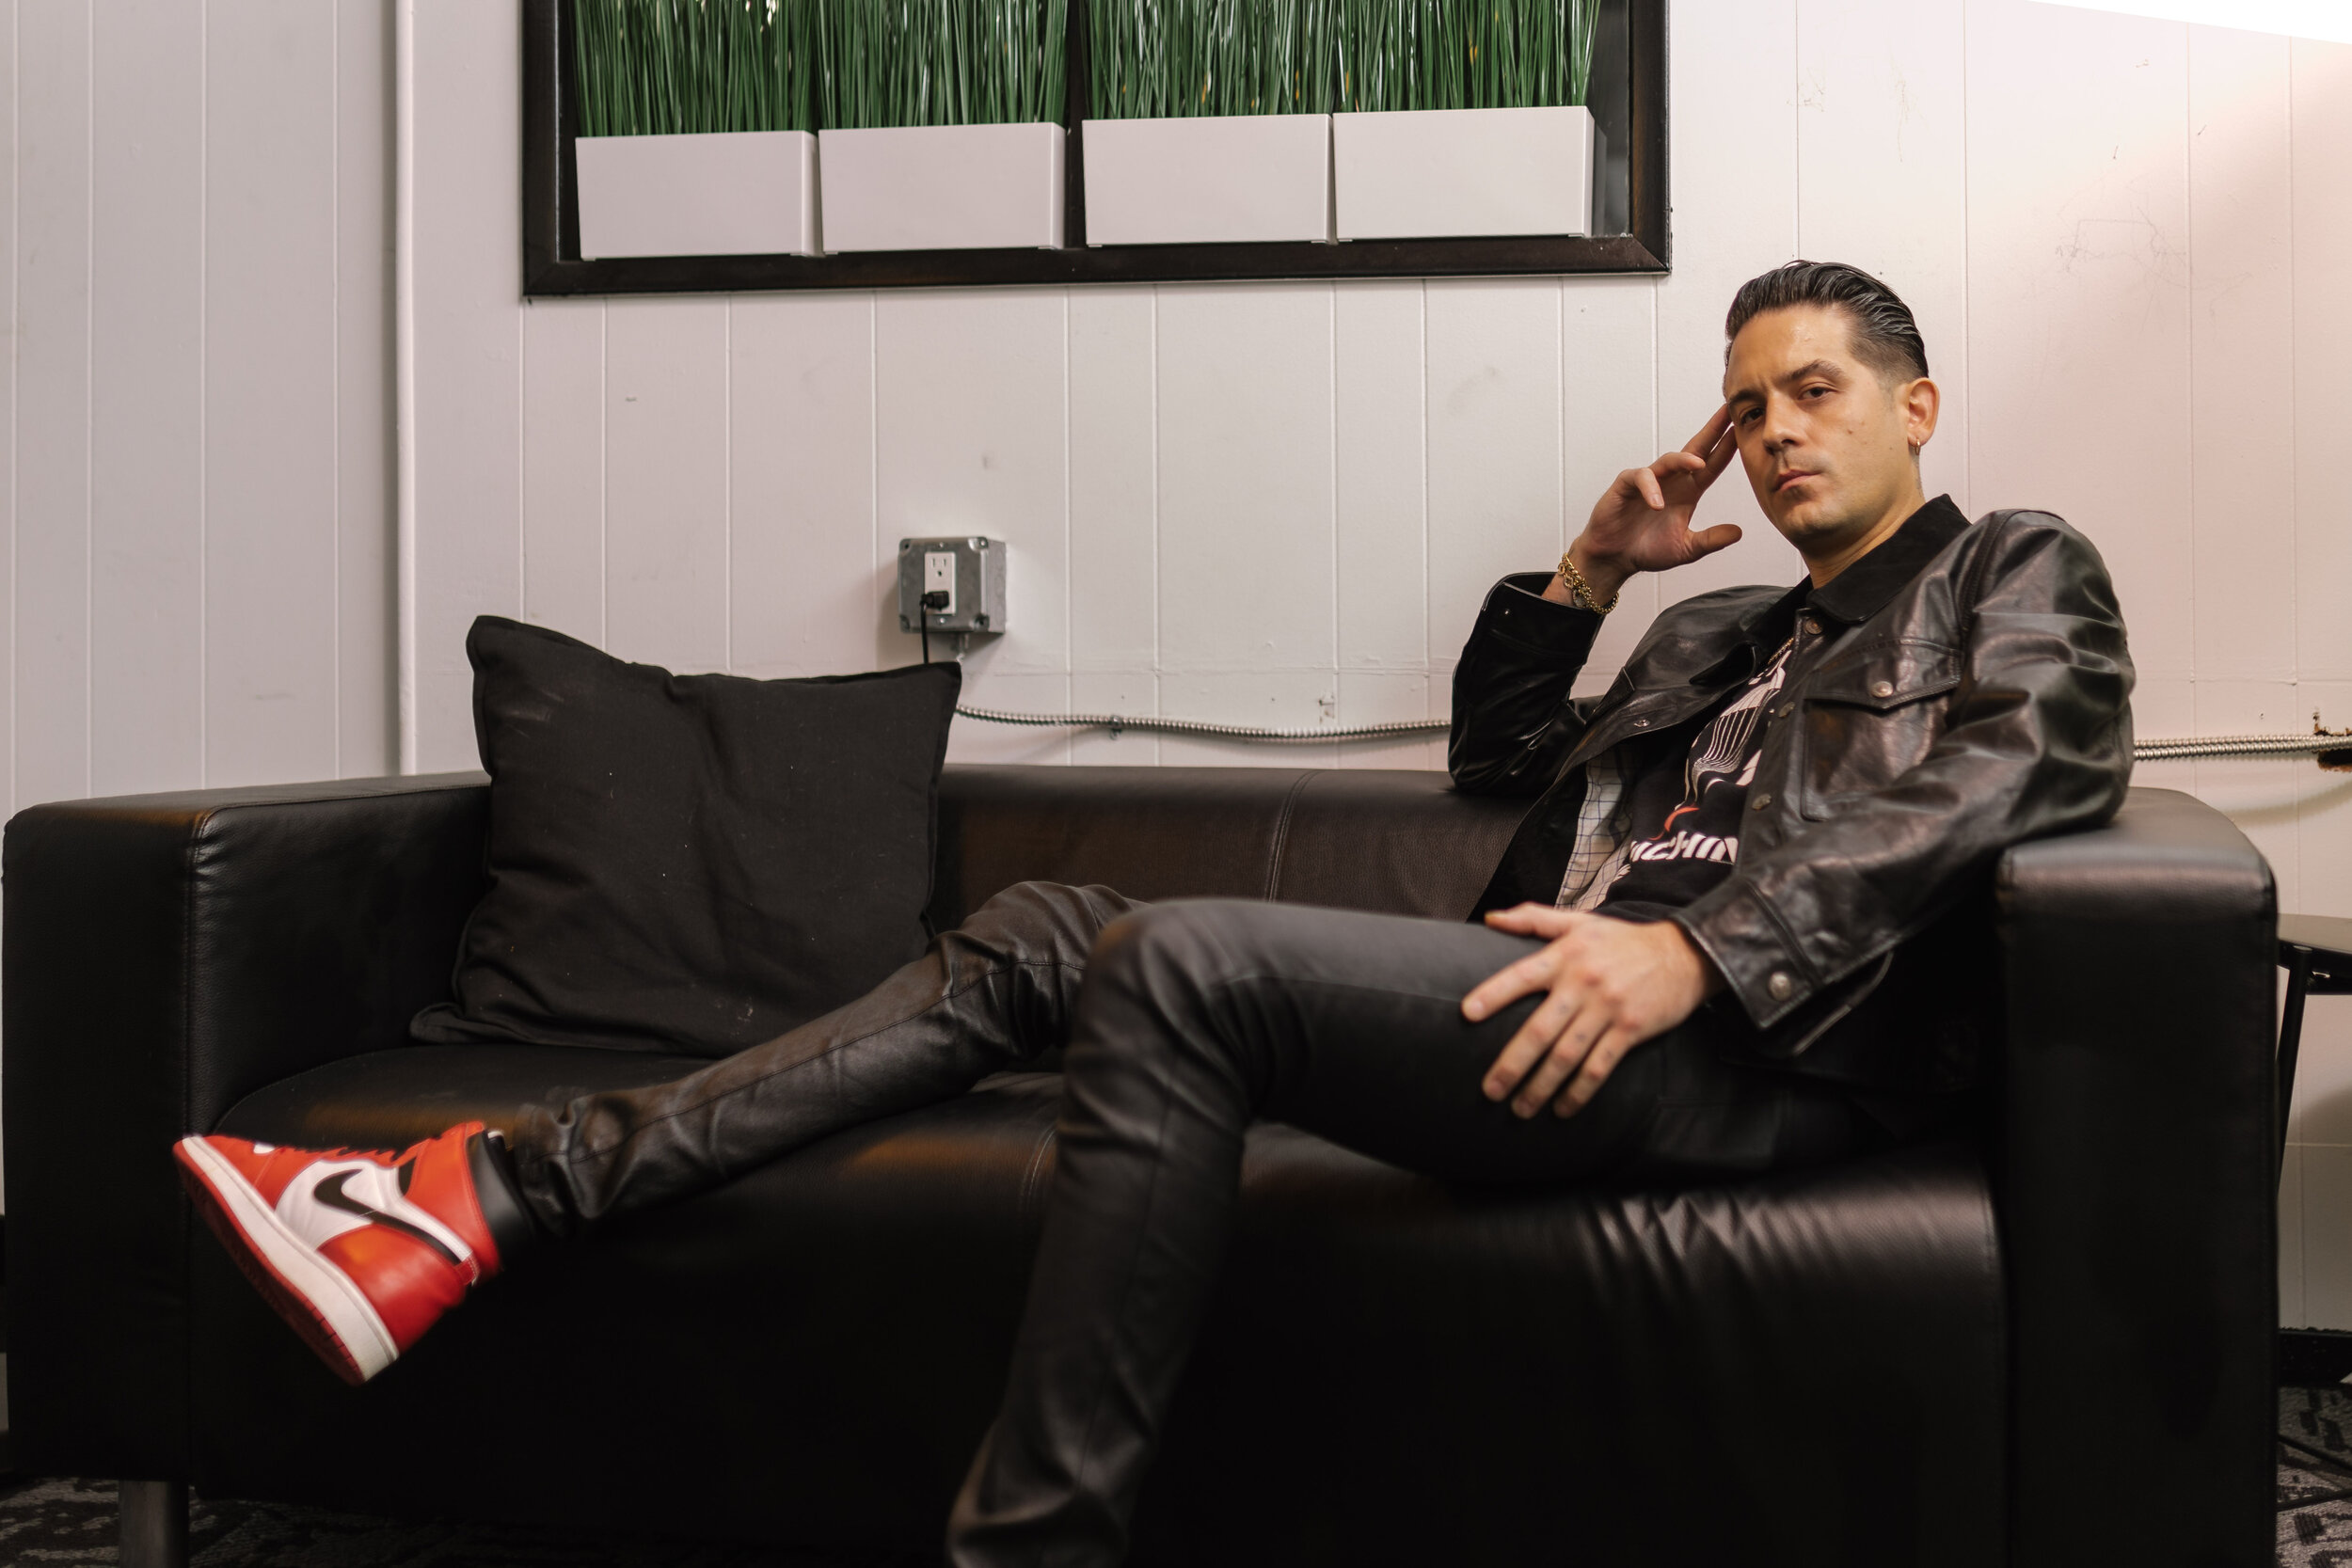 G-Eazy discusses his upcoming album and love of Rolex watches